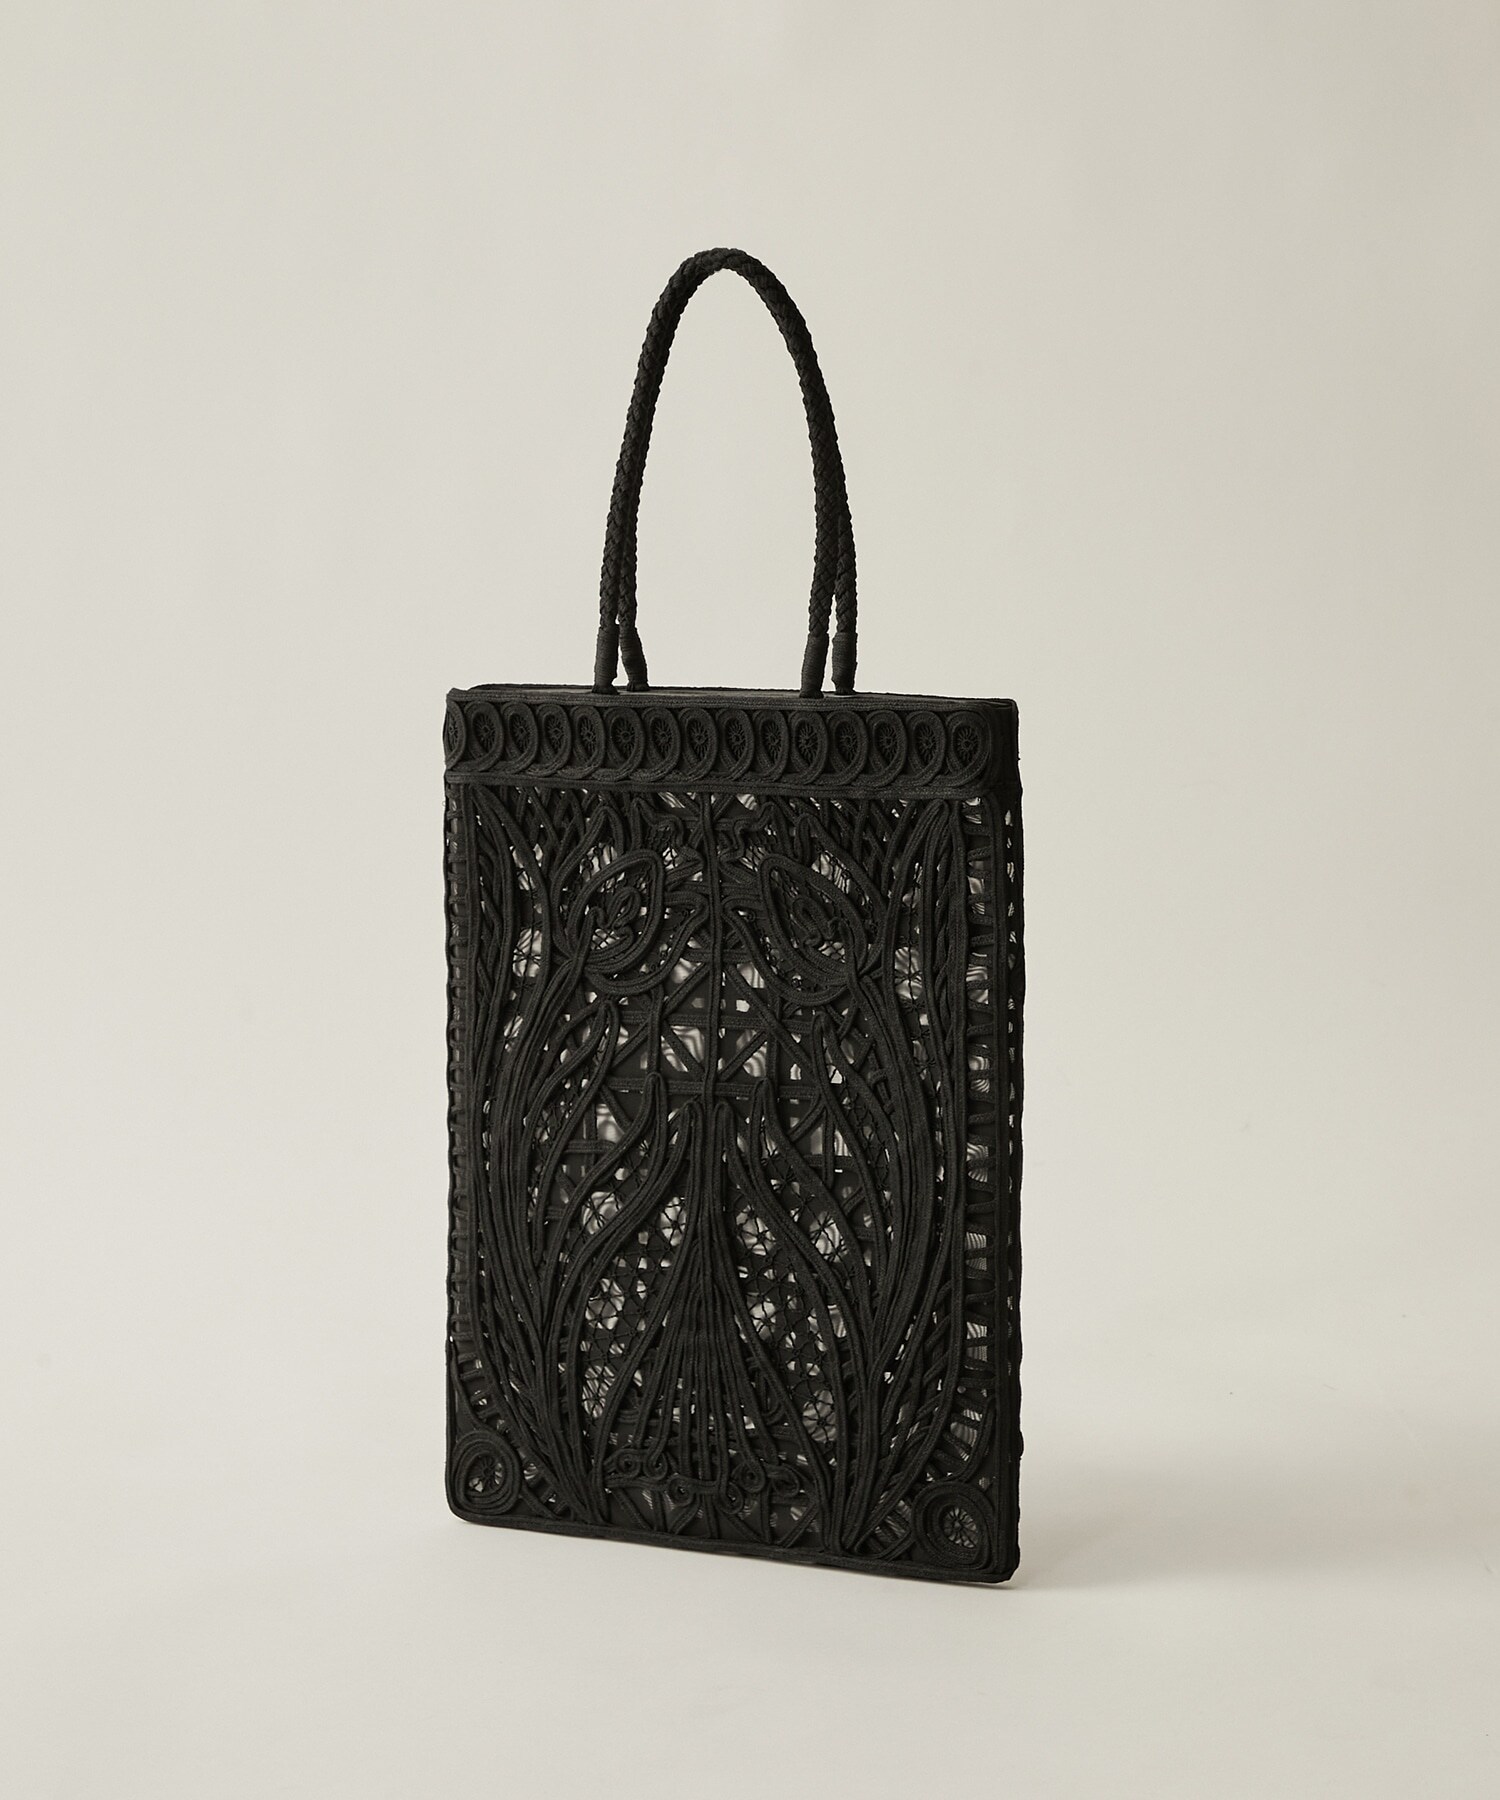 Cording Embroidery Tote Bag